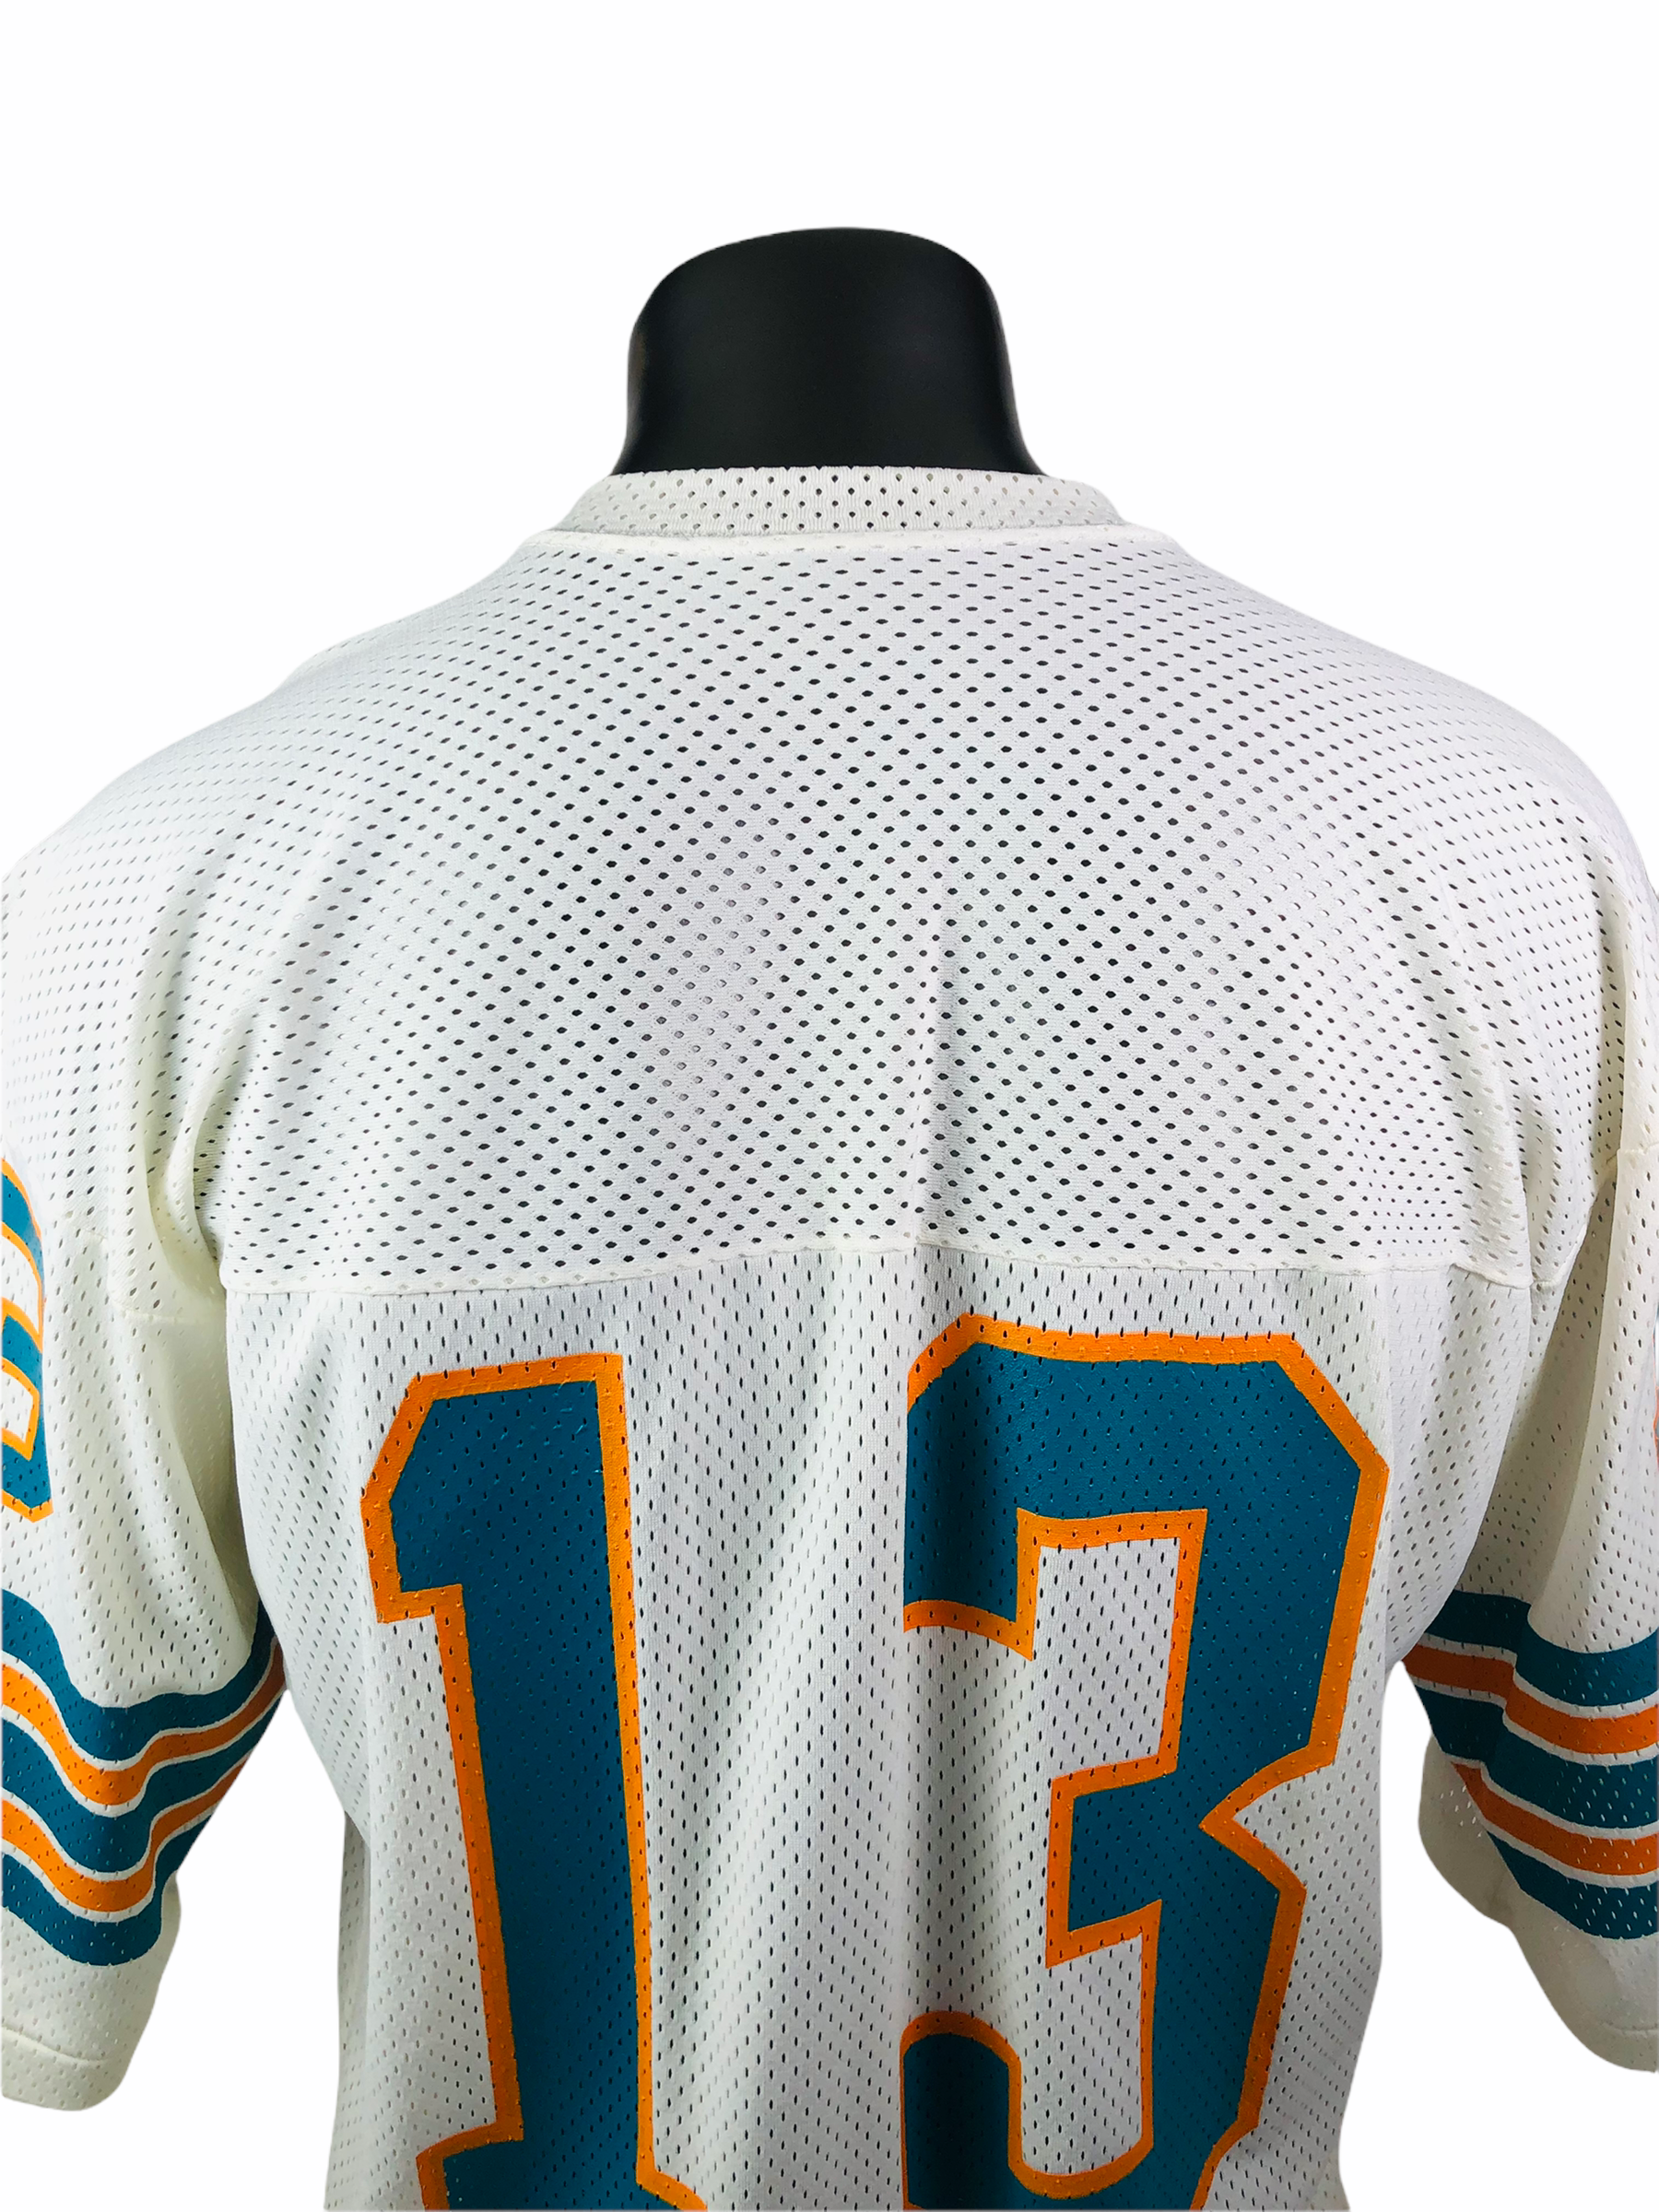 vintage dolphins jersey